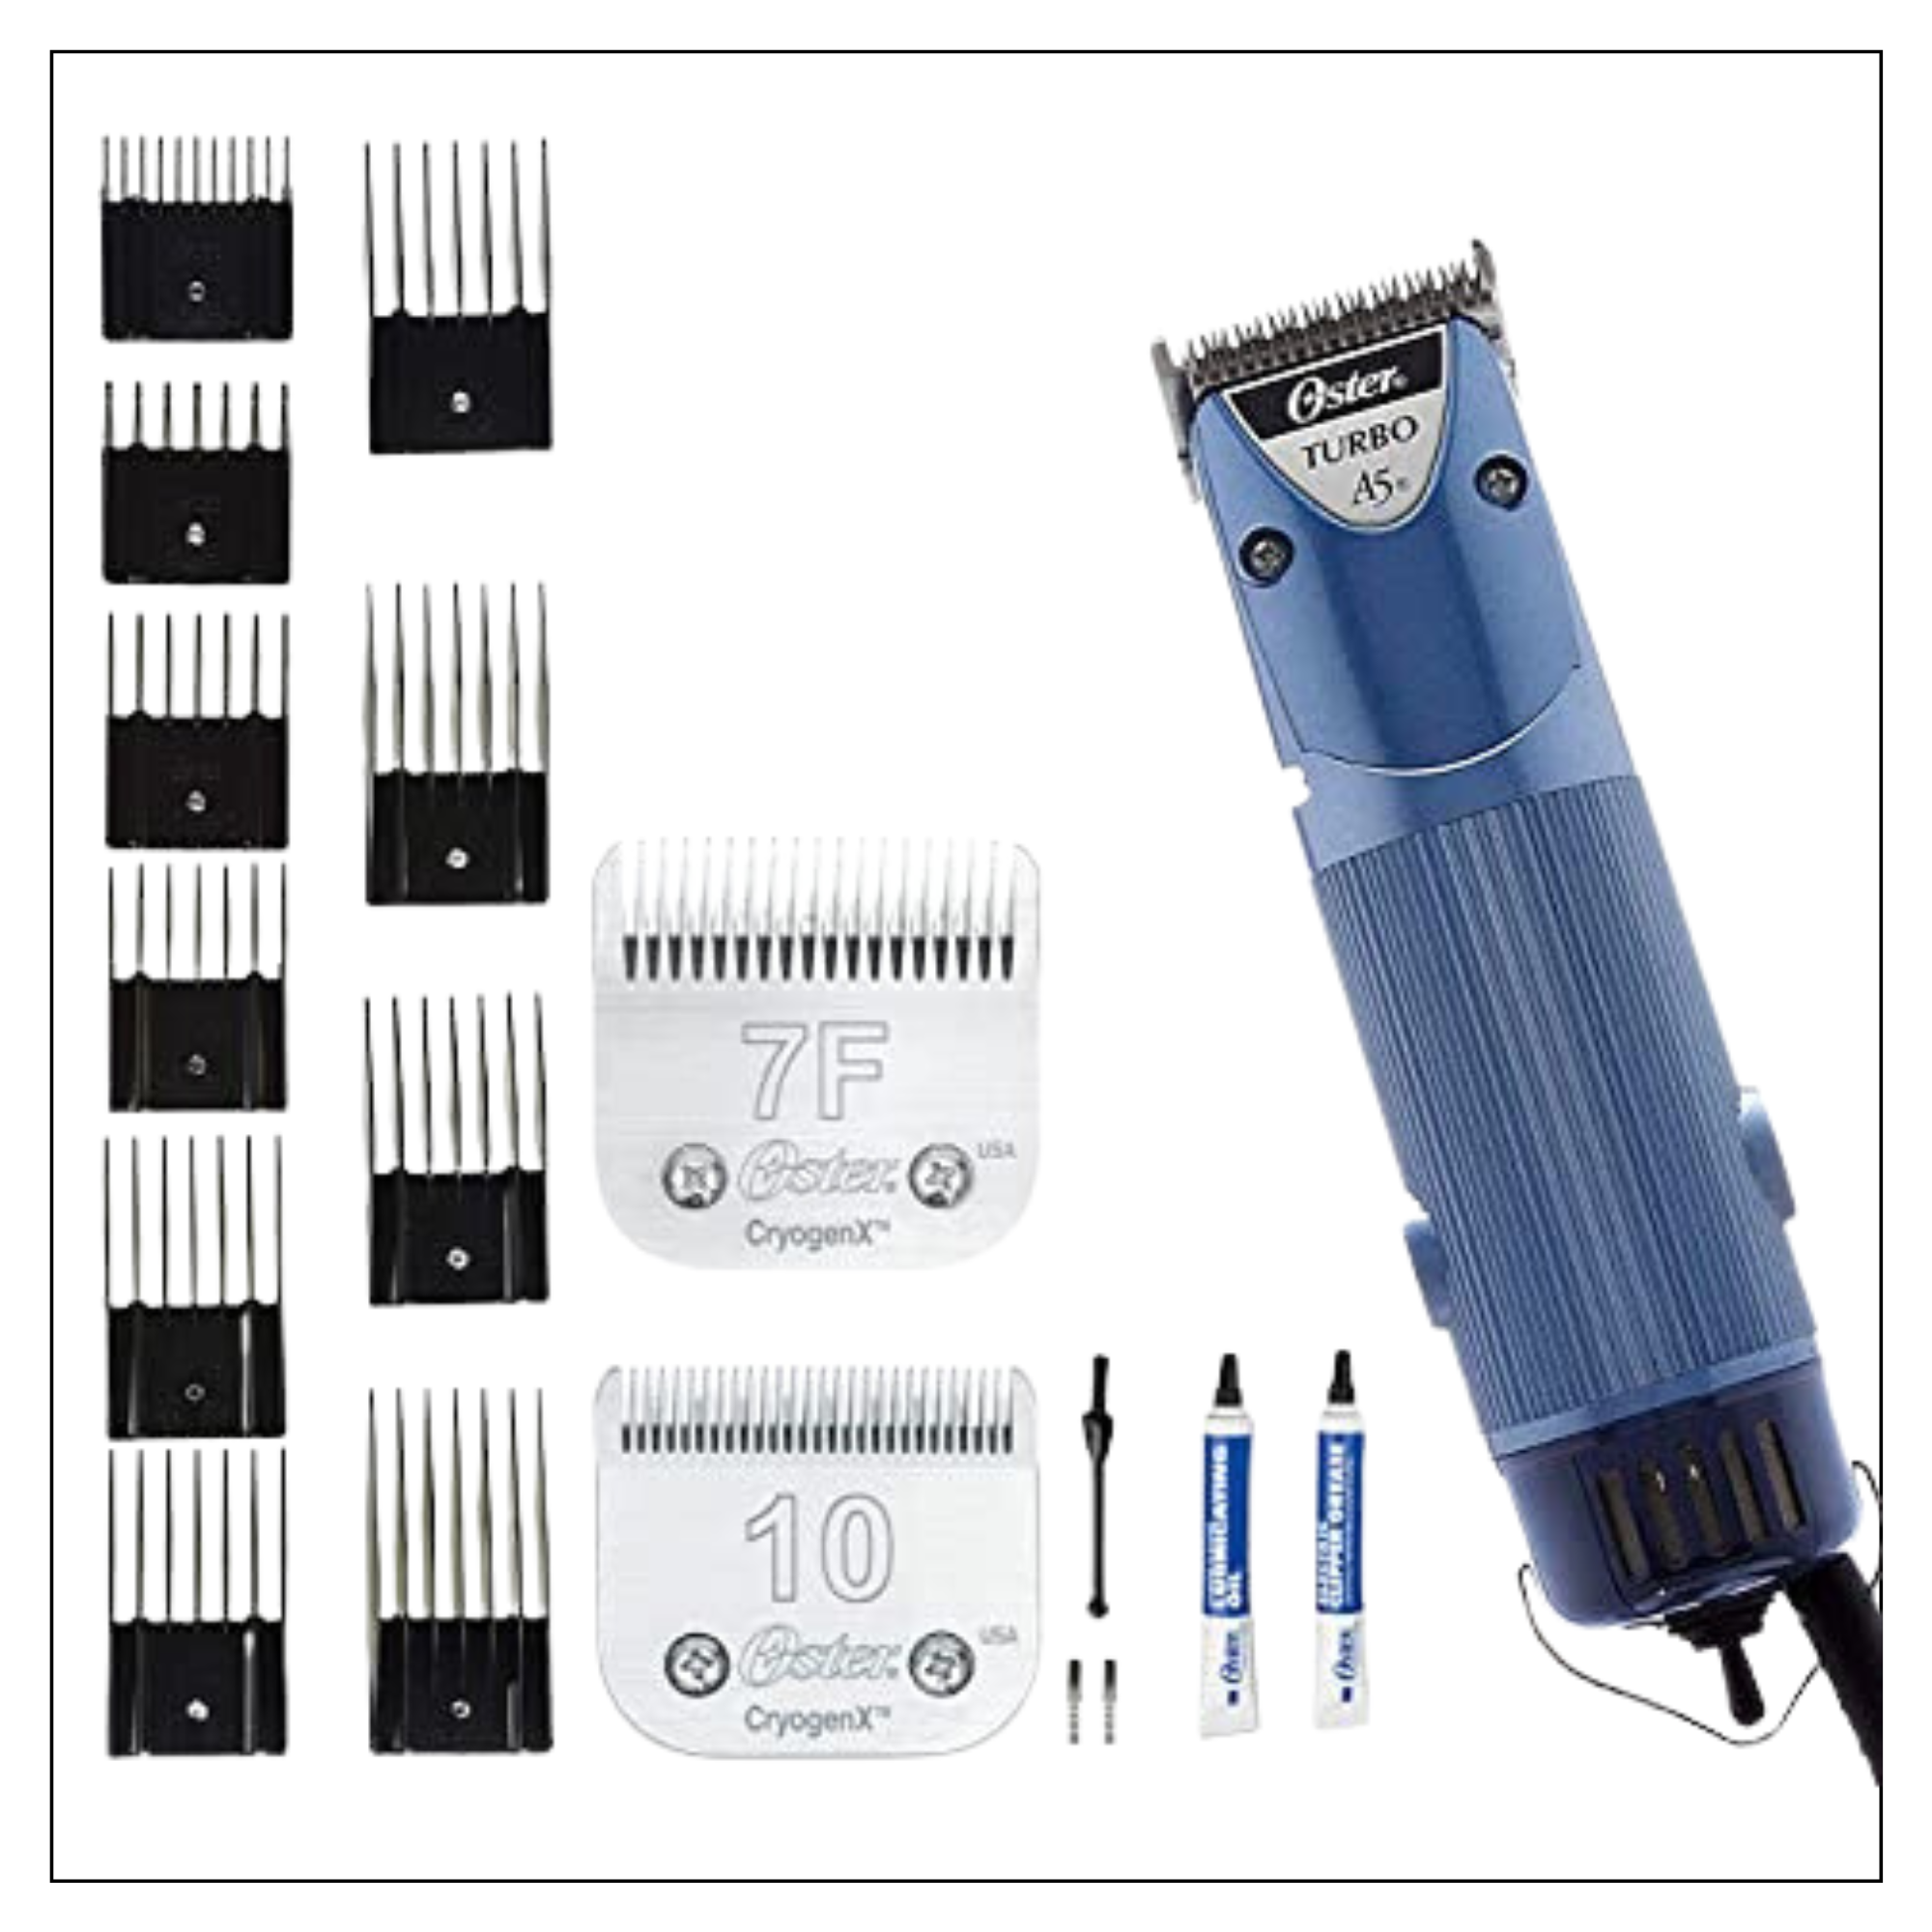 Oster A5 Dual Speed Grooming Clipper with Detachable Cryogen-X Blades #10 and #7F 7 Piece Universal Combs Guides Set